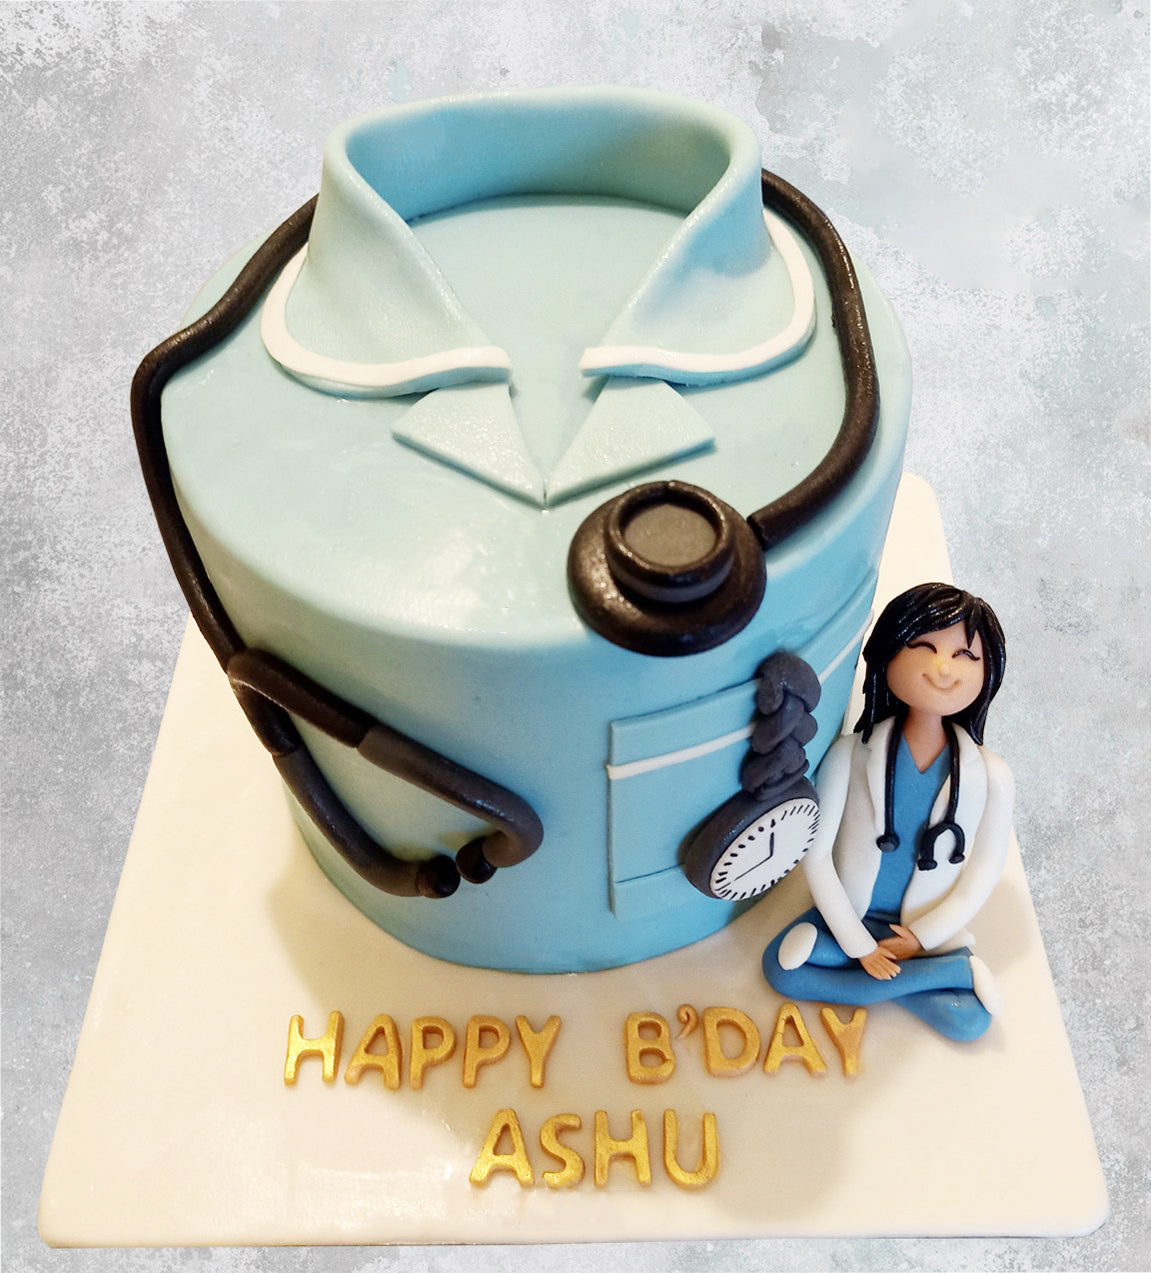 It was made with love and student debt #cakedecorating #cake #doctor #... |  TikTok